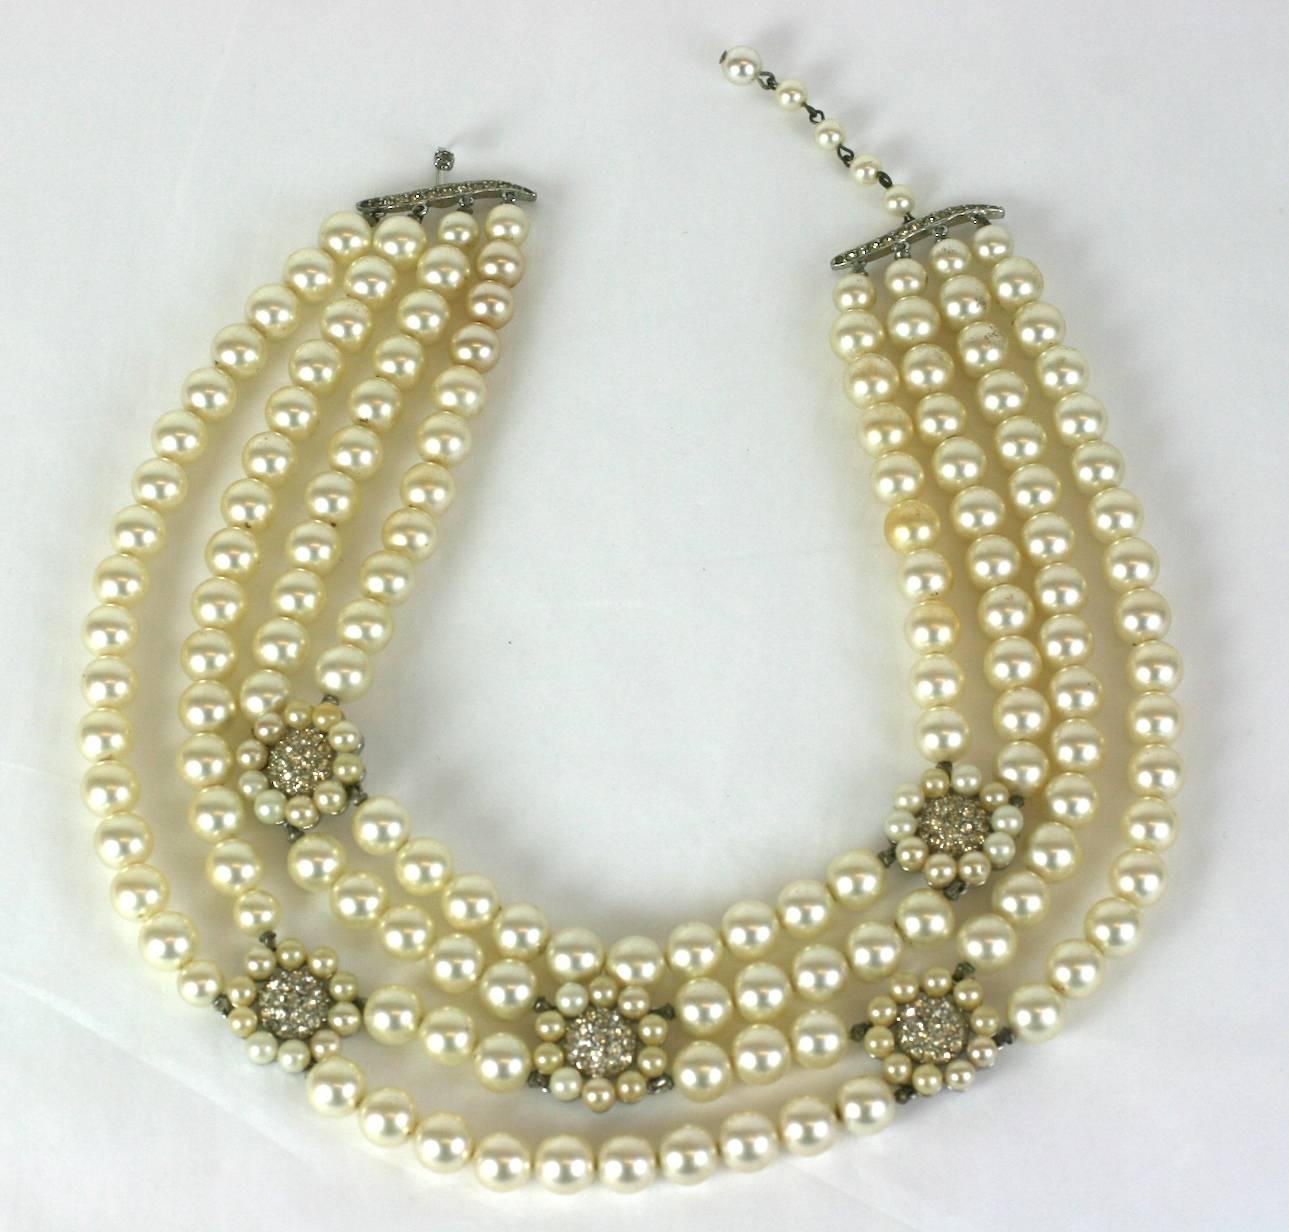 Elegant Trifari multistrand faux pearl and diamonte necklace from the 1960's. Pearls are attached to floral stations with pave centers. Adjustable length. 13